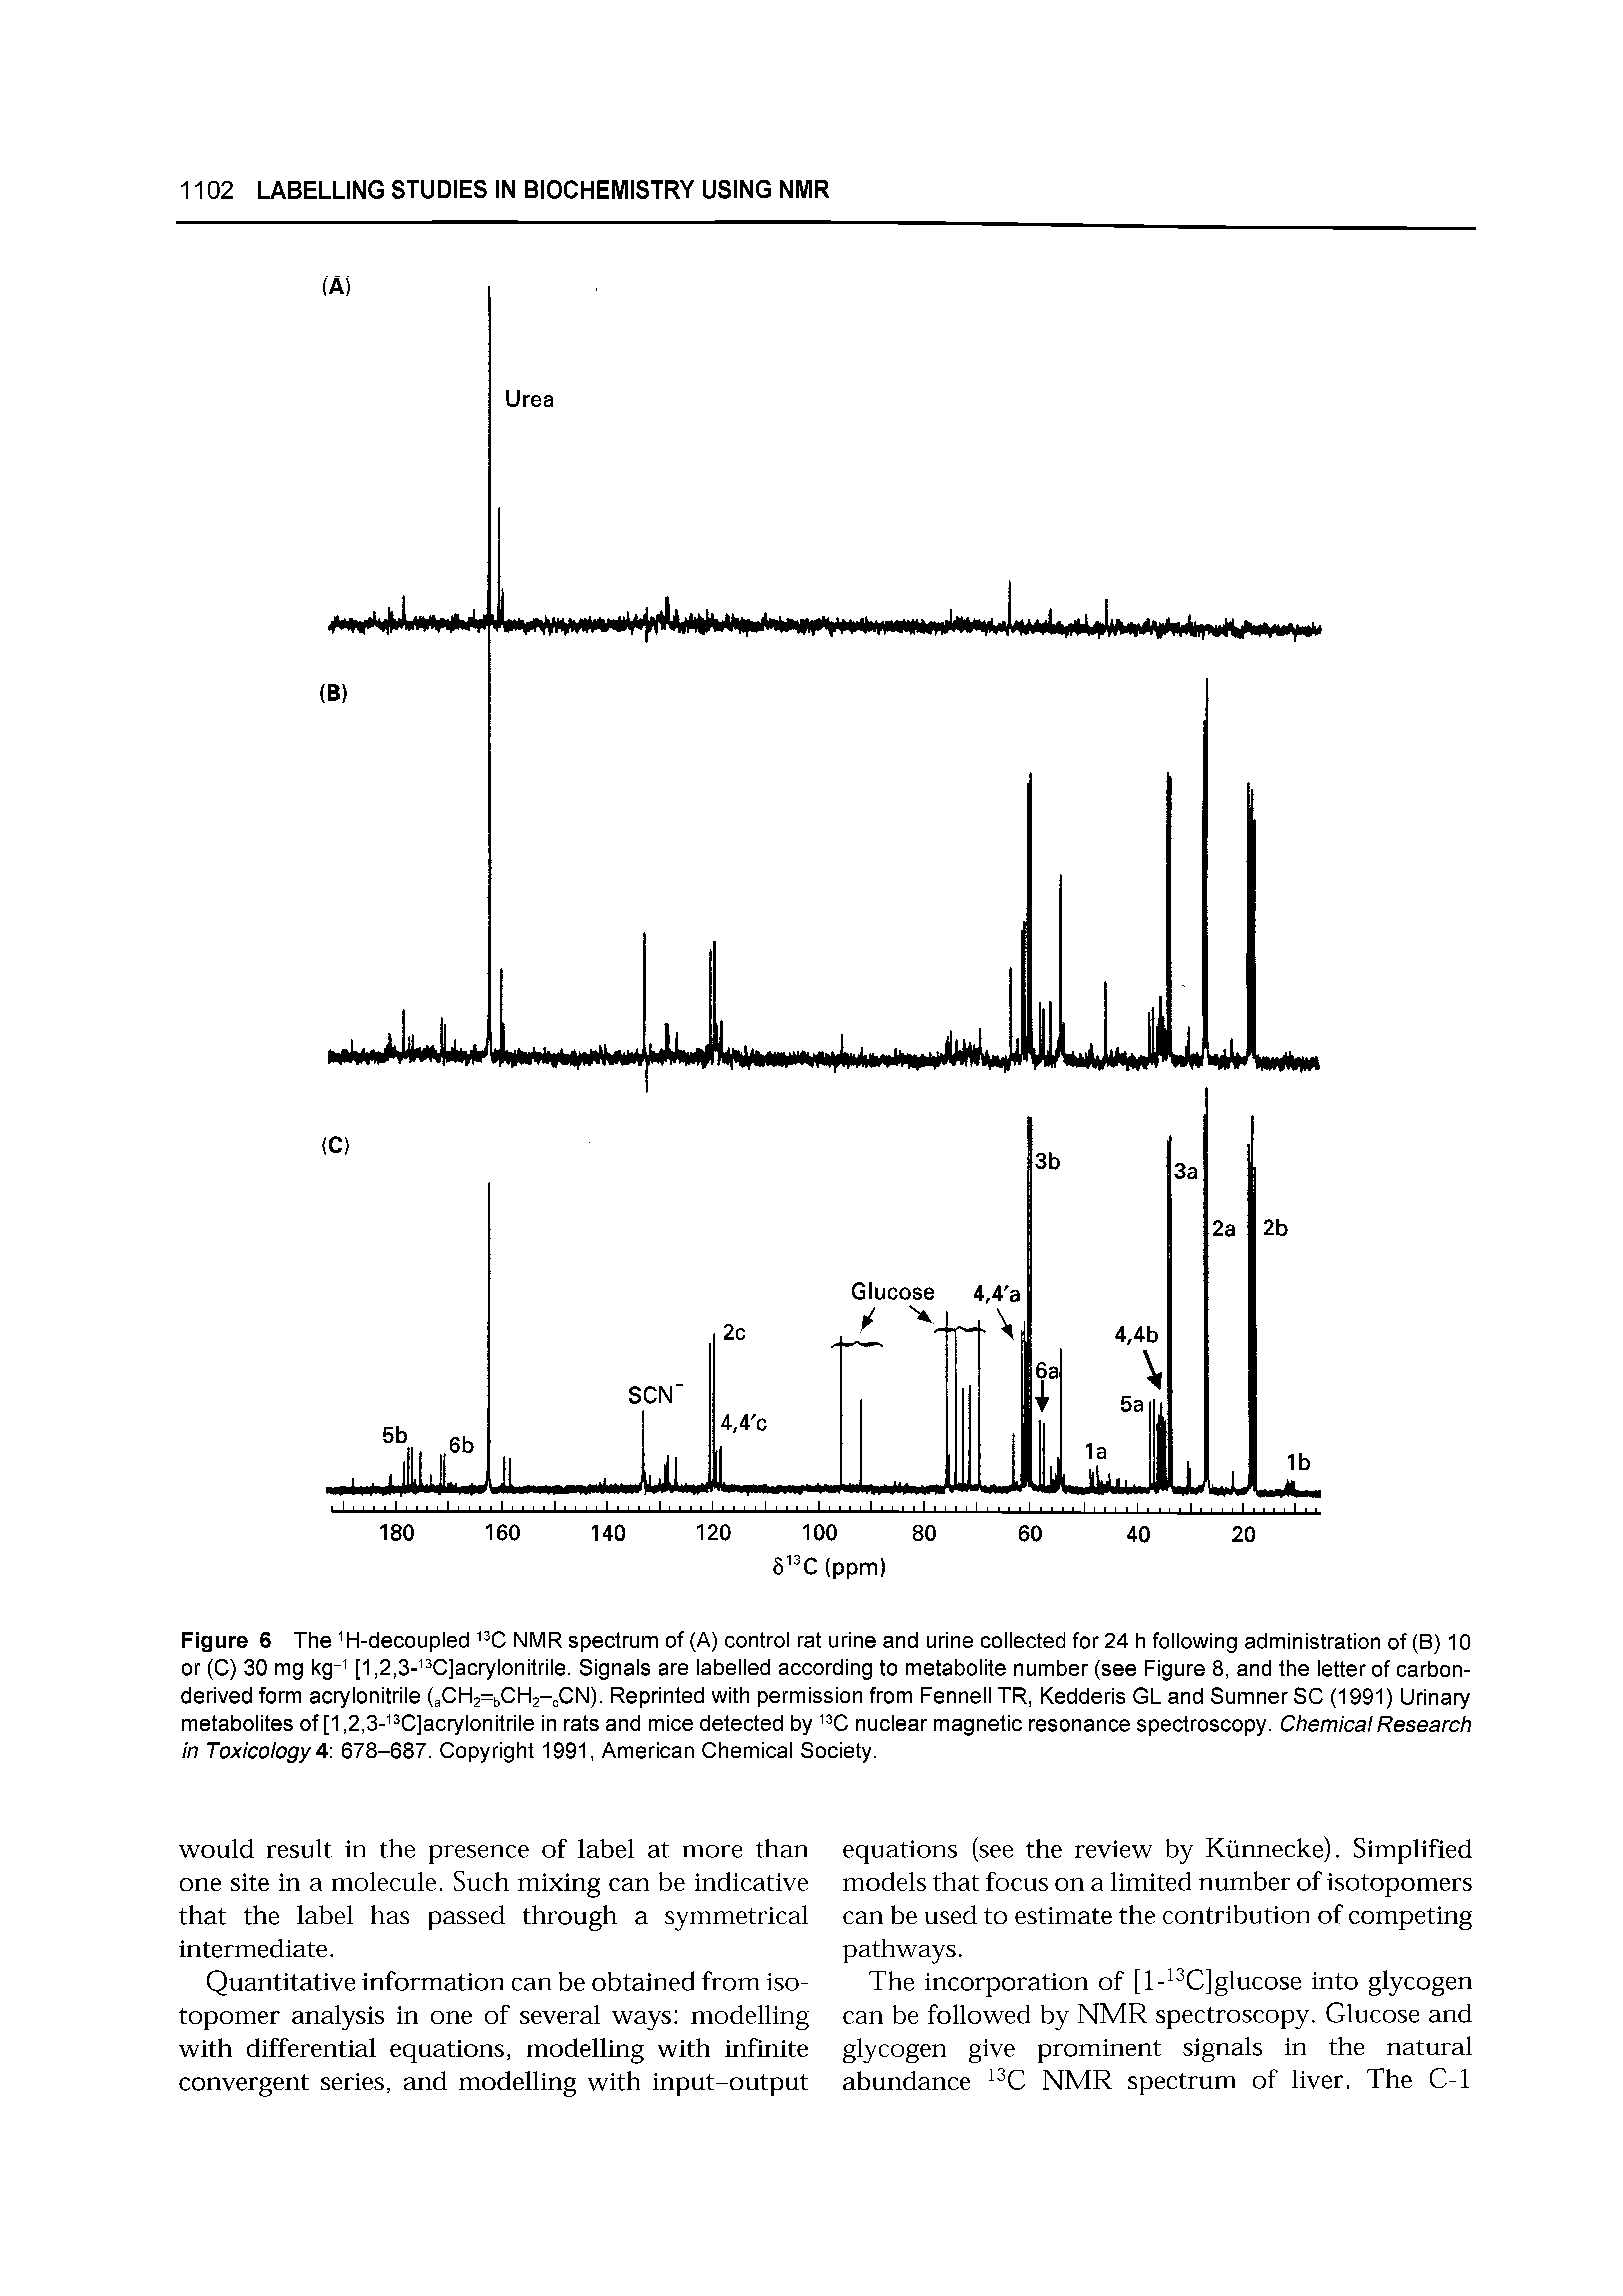 Figure 6 The H-decoupled NMR spectrum of (A) control rat urine and urine collected for 24 h following administration of (B) 10 or (C) 30 mg kg- [1,2,3- C]acrylonitrile. Signals are labelled according to metabolite number (see Figure 8, and the letter of carbon-derived form acrylonitrile (aCH2=bCH2-cCN). Reprinted with permission from Fennell TR, Kedderis GL and Sumner SC (1991) Urinary metabolites of [1,2,3- 3C]acrylonitrile in rats and mice detected by nuclear magnetic resonance spectroscopy. Chemical Research in Toxicology 678-687. Copyright 1991, American Chemical Society.